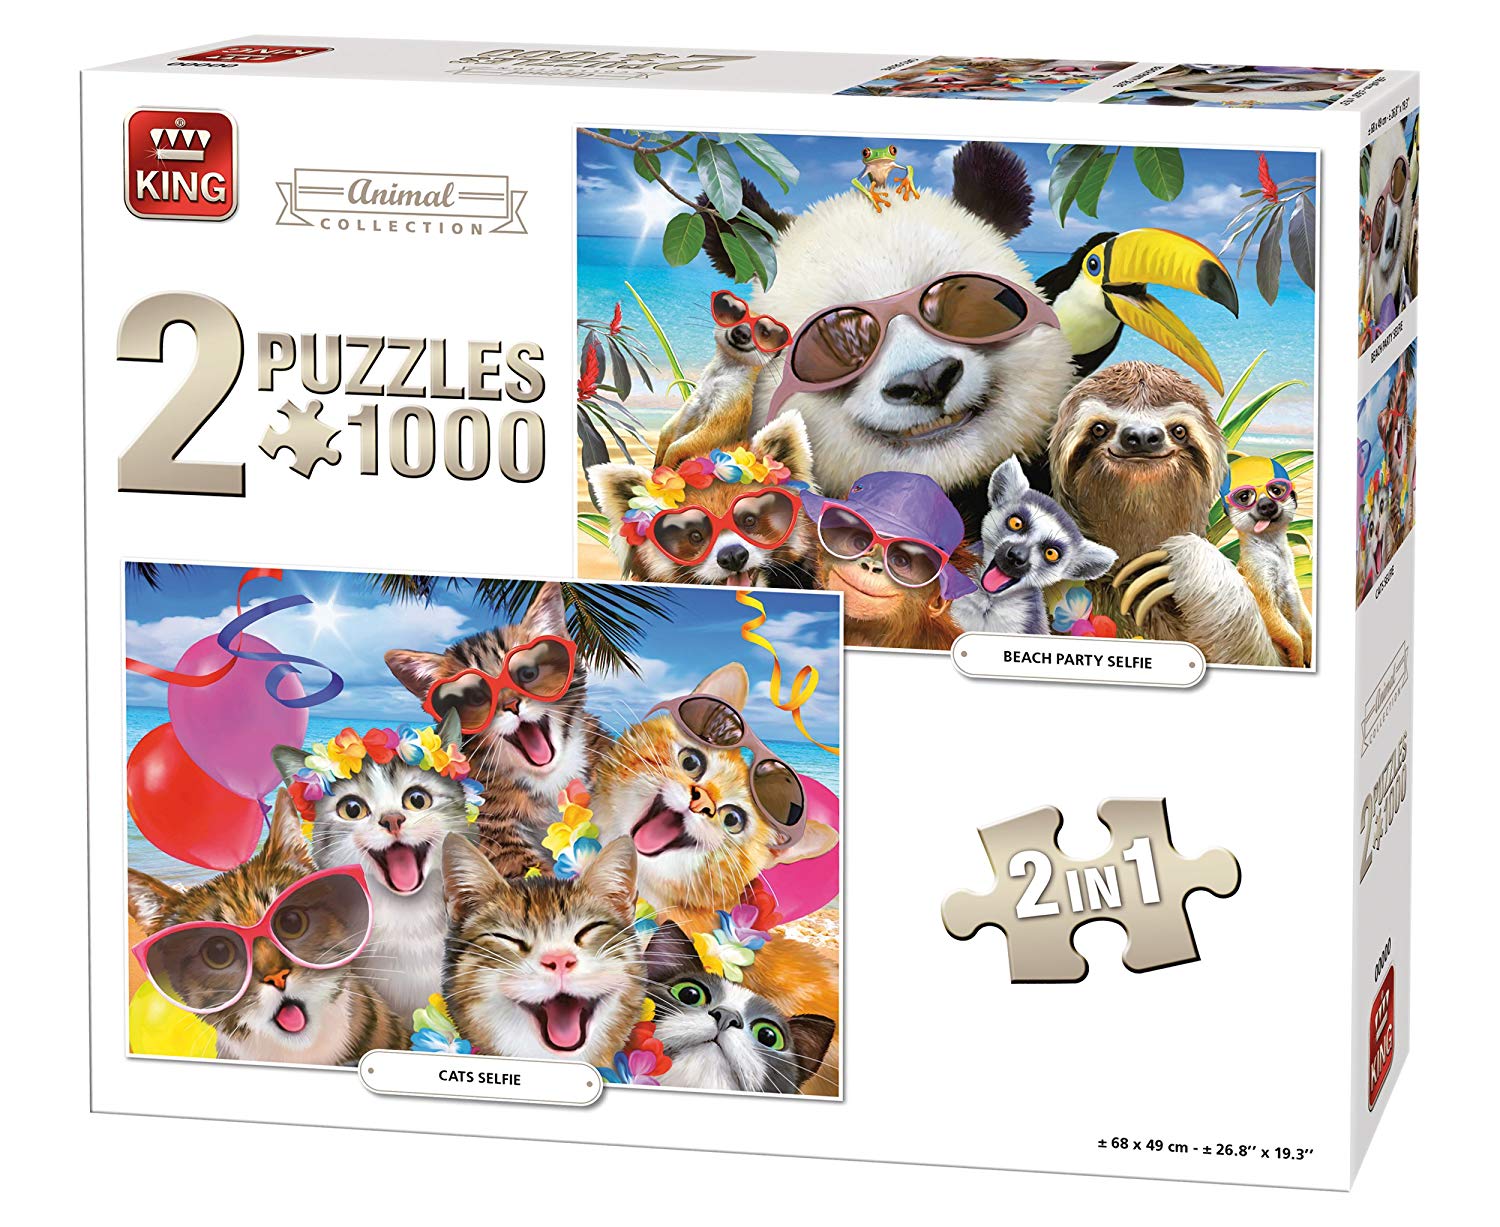 Puzzle Animal collection: Selfie